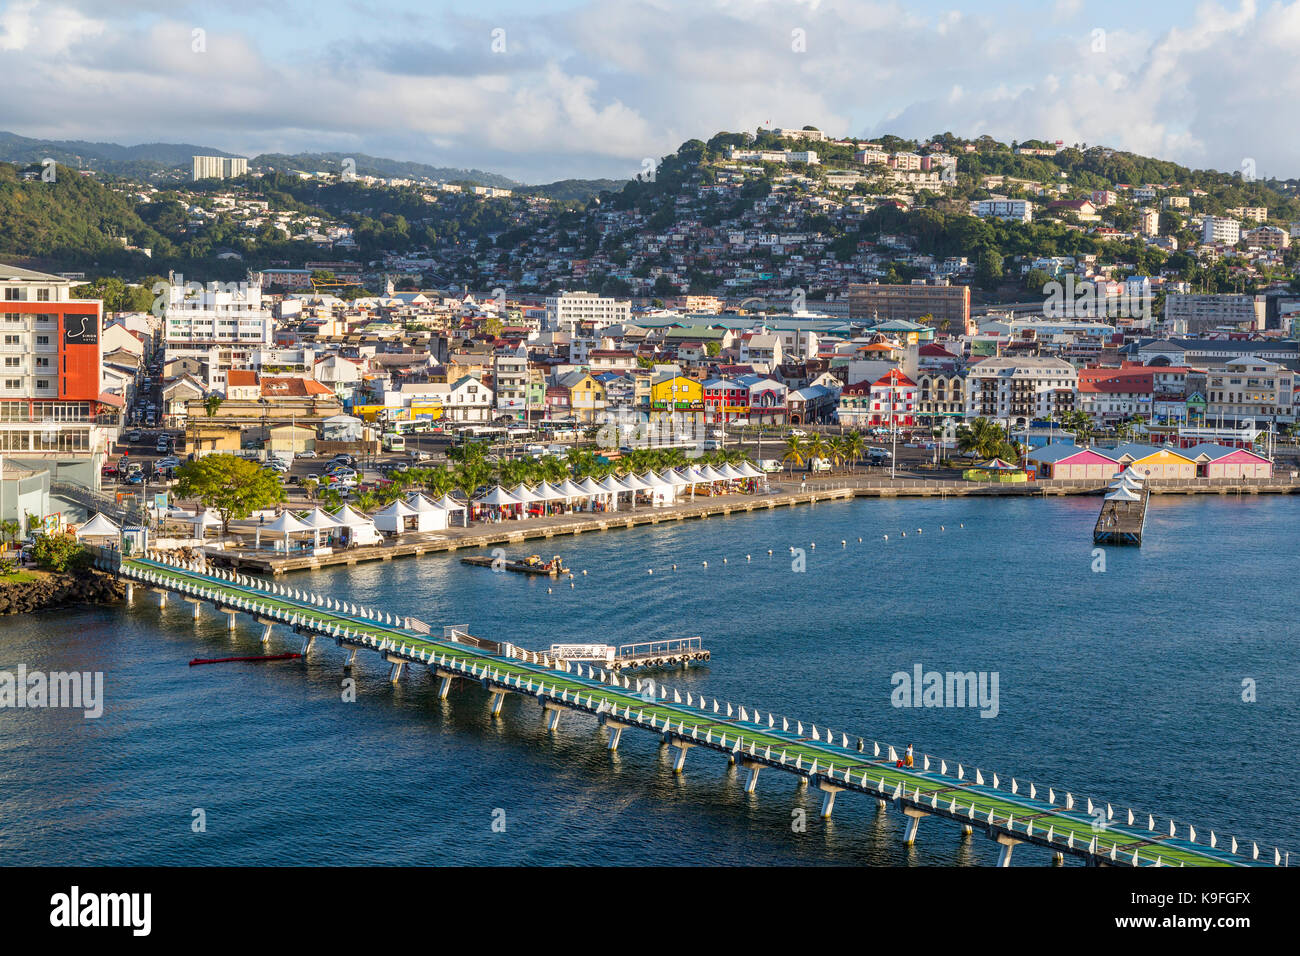 Fort-de-France, Martinique.  View of the Town from the Harbor, Early Morning. Stock Photo